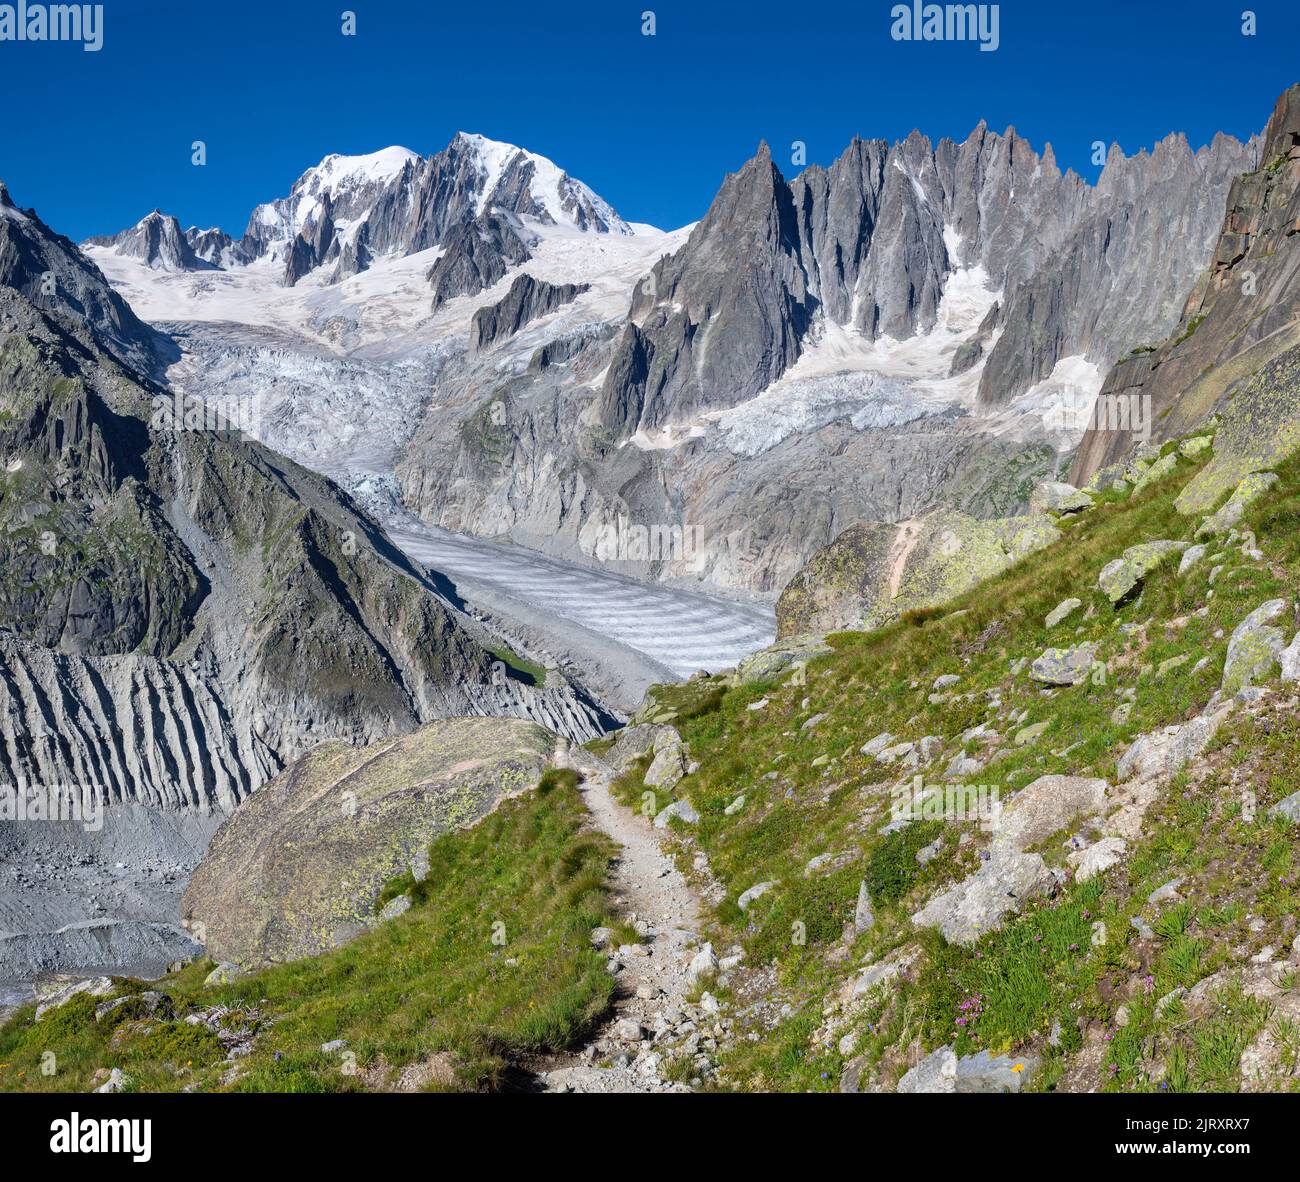 The Mont Blanc massif and  Les Aiguilles towers - Savoy alps. Stock Photo